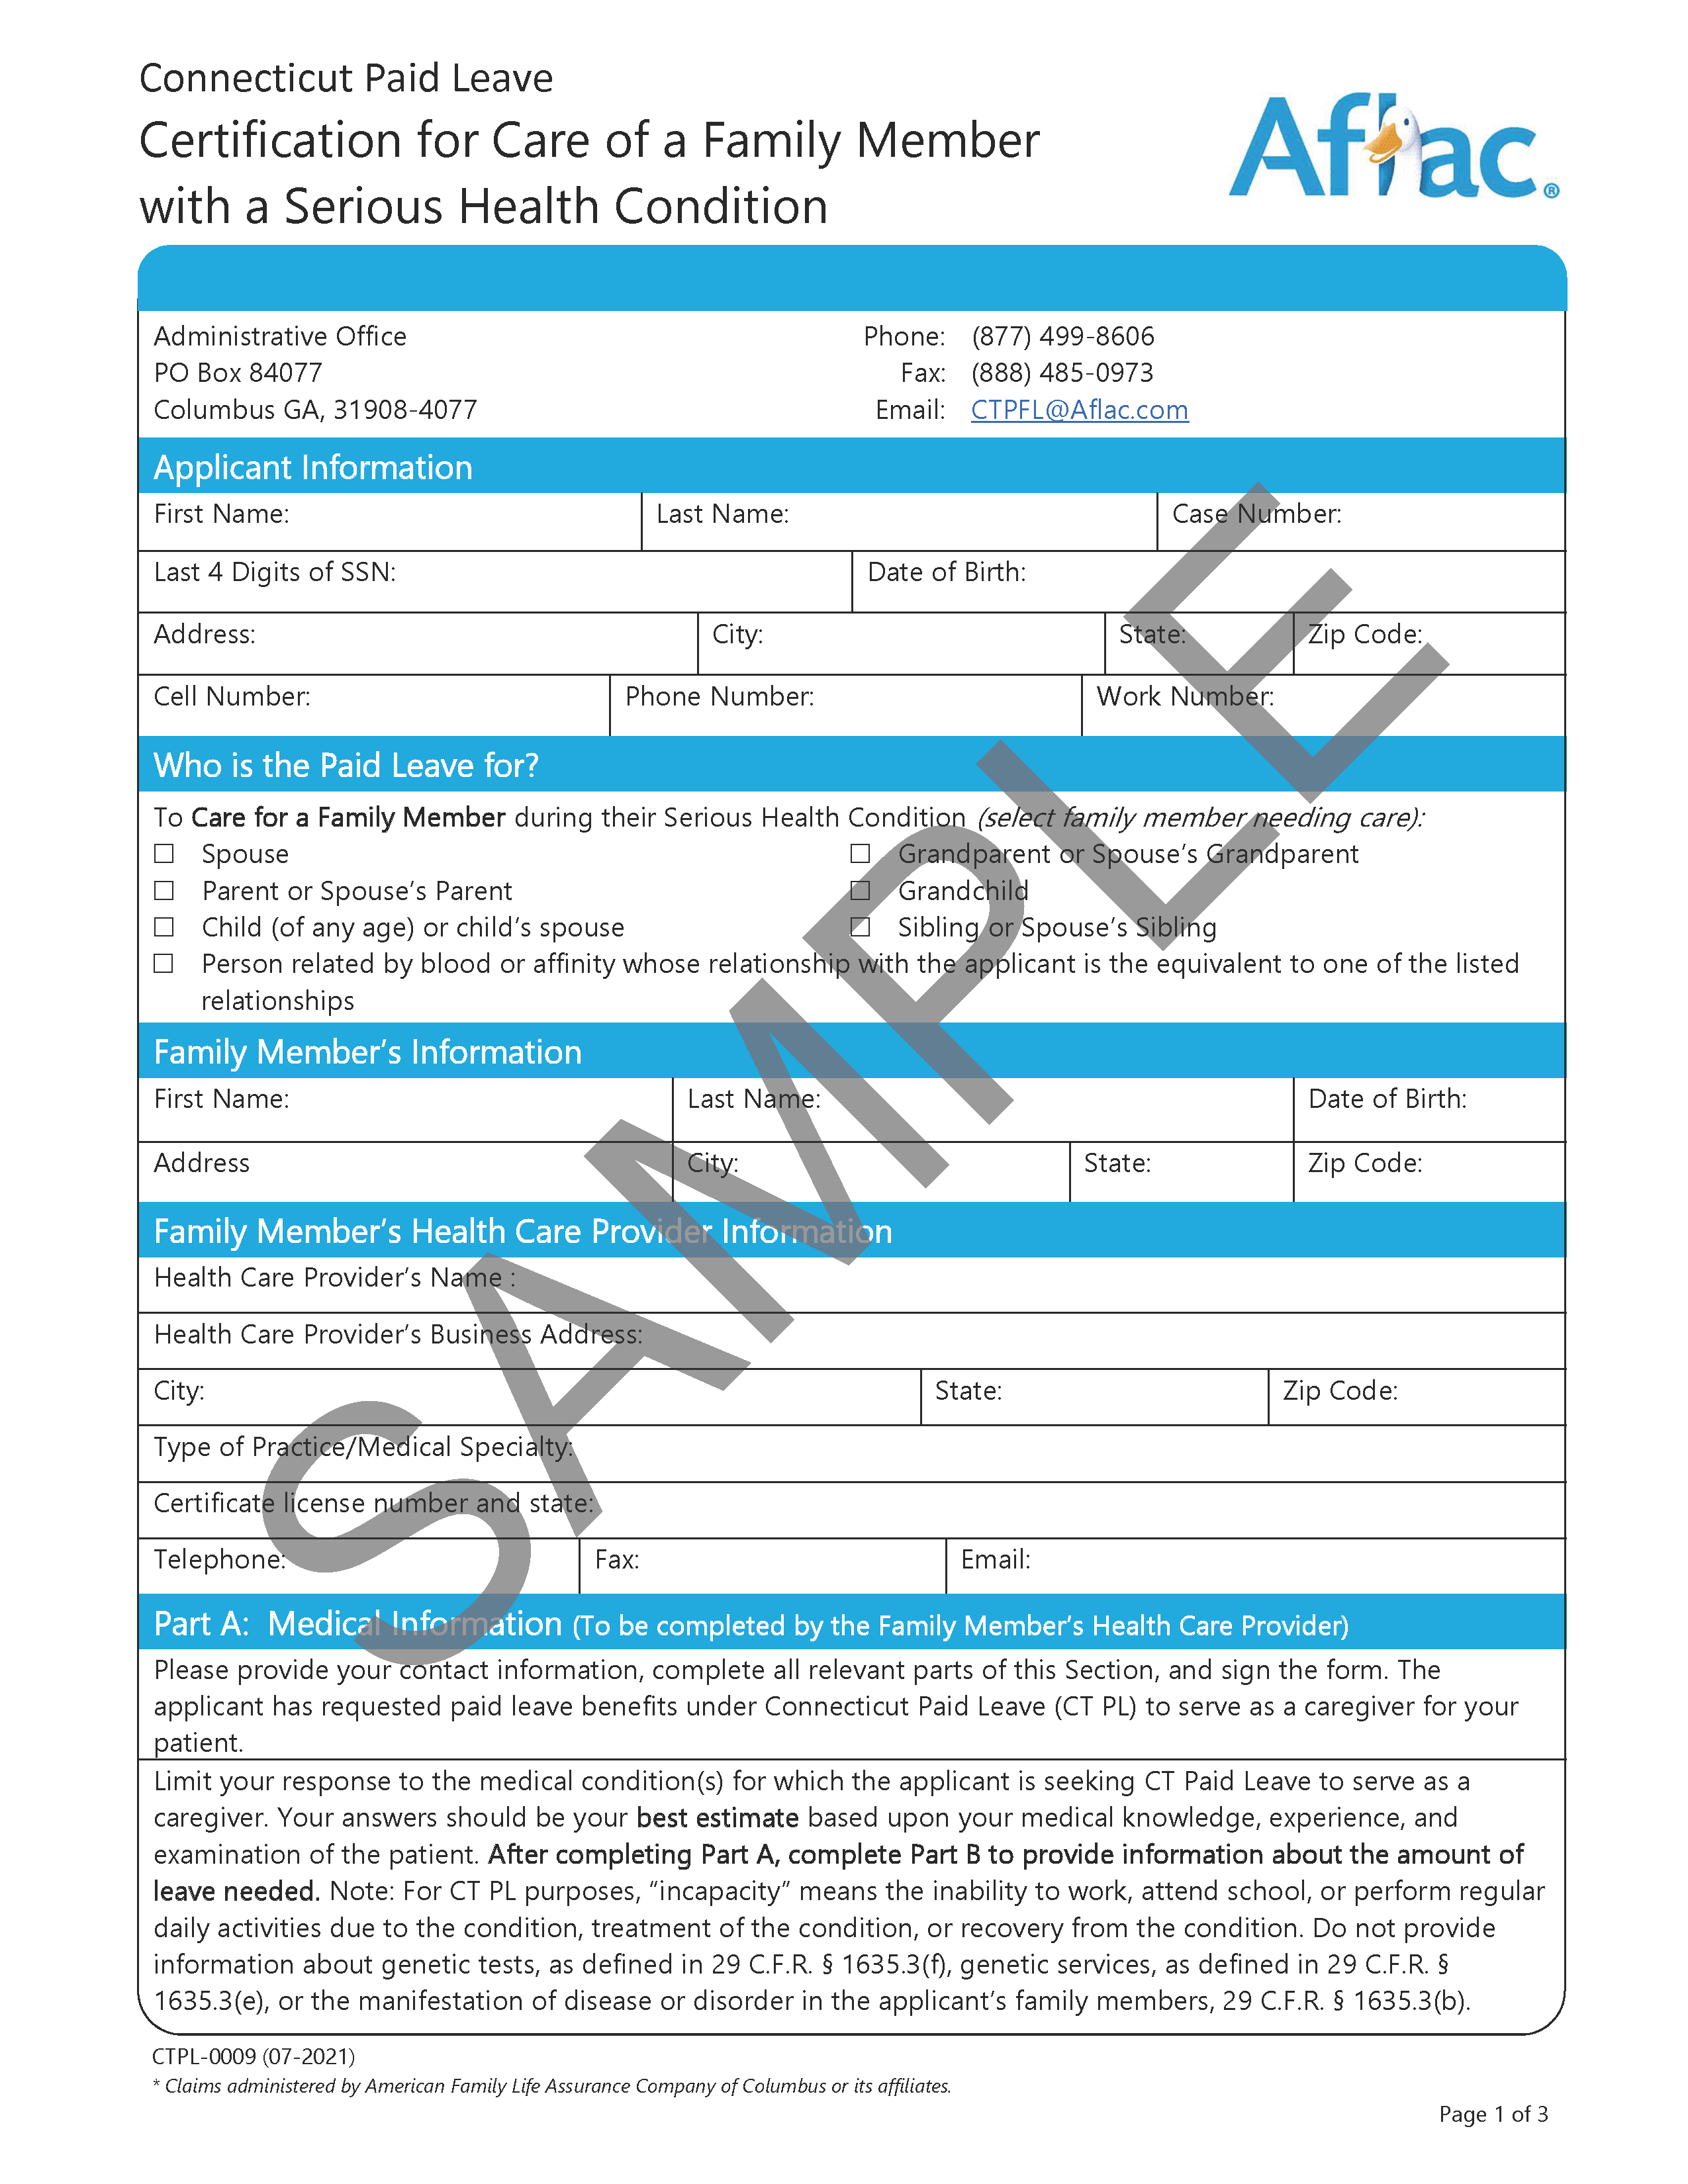 Sampel Certification for Care of a Family Member with a Serious Health Condition form